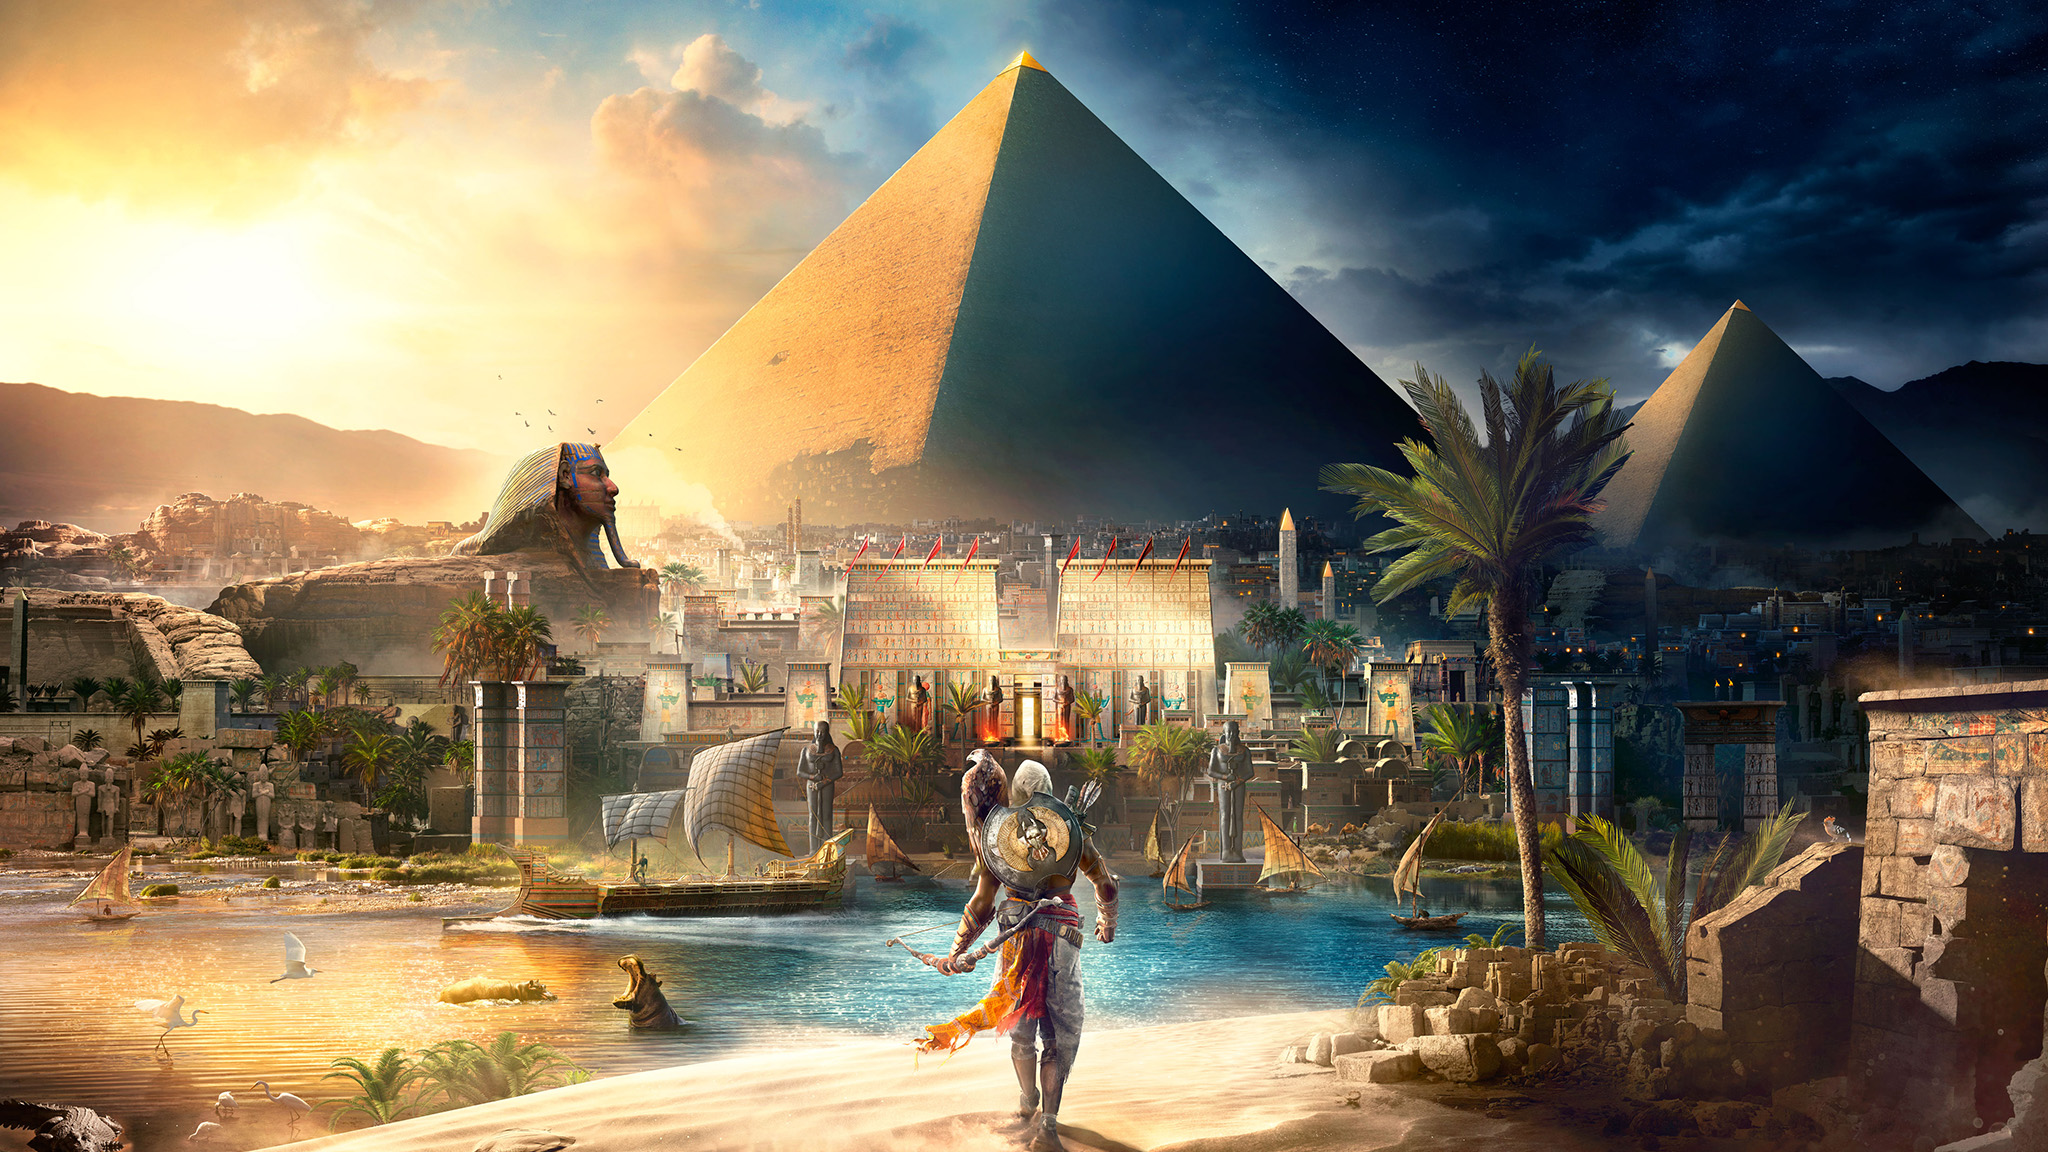 General 2048x1152 Assassin's Creed Egypt Pyramids of Giza Bayek eagle Ubisoft landscape boat river Nile video games sphynx Assassin's Creed: Origins video game art PC gaming